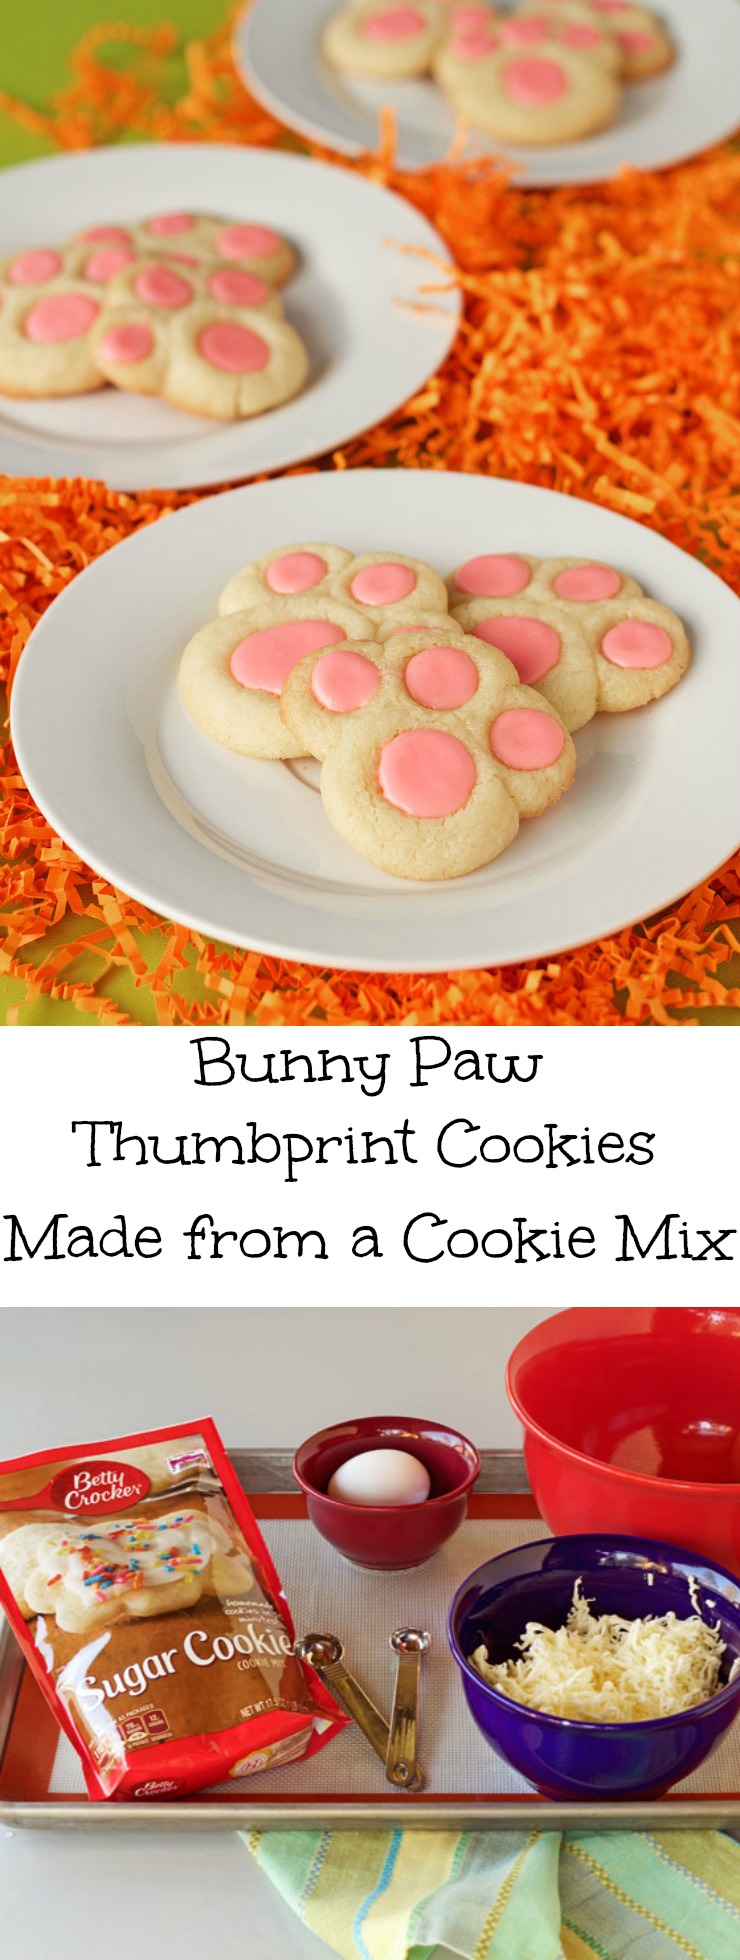 Bunny Paw Thumbprint Cookies Made from a Cookie Mix via www.thebearfootbaker.com